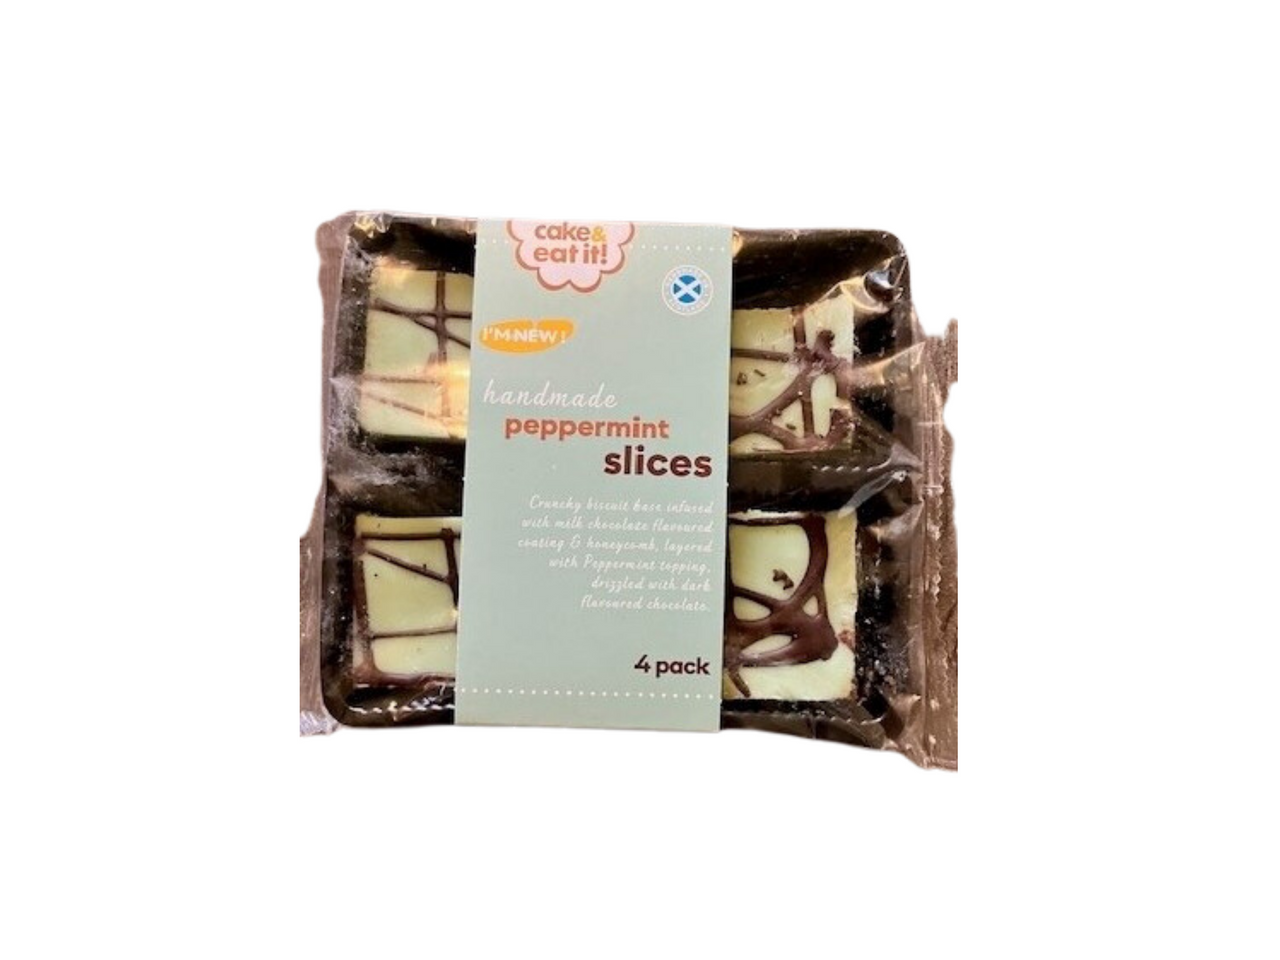 Cake & Eat It! Peppermint Slices 4 Pack (Sep - Oct 23) RRP £1.49 CLEARANCE XL 89p or 2 for £1.50